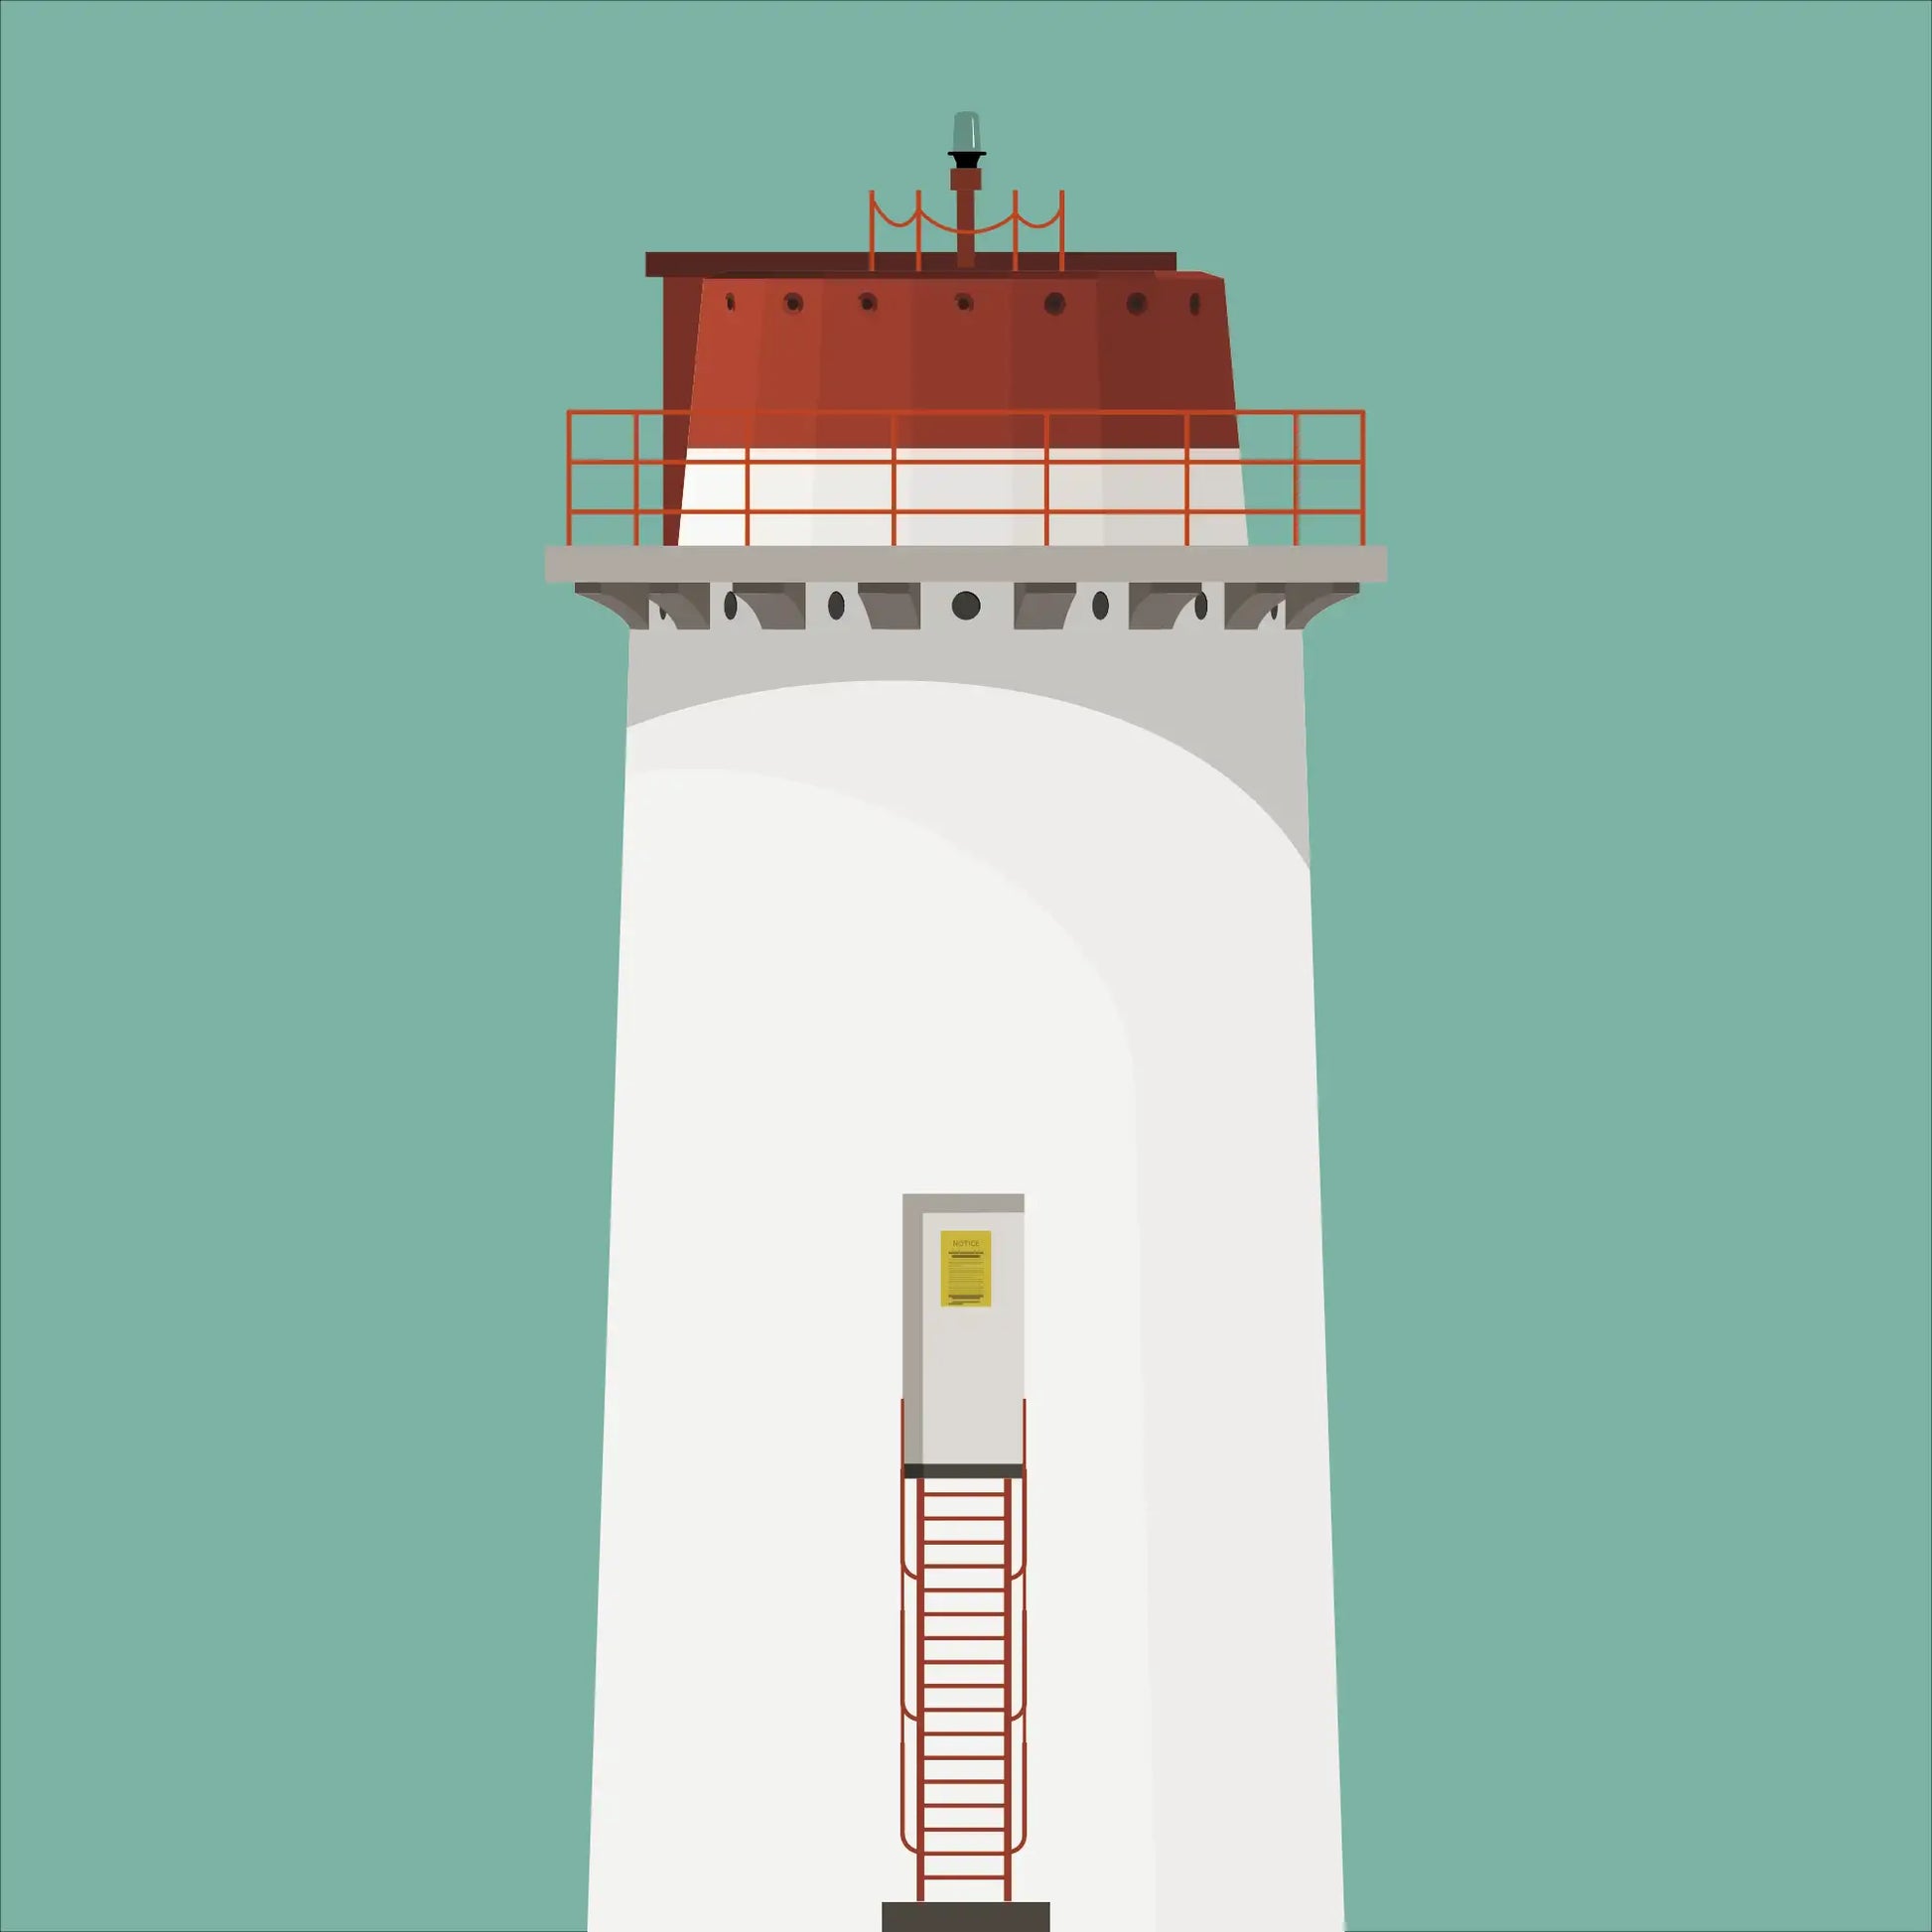 Contemporary graphic illustration of Angus_Rock lighthouse on a white background inside light blue square.